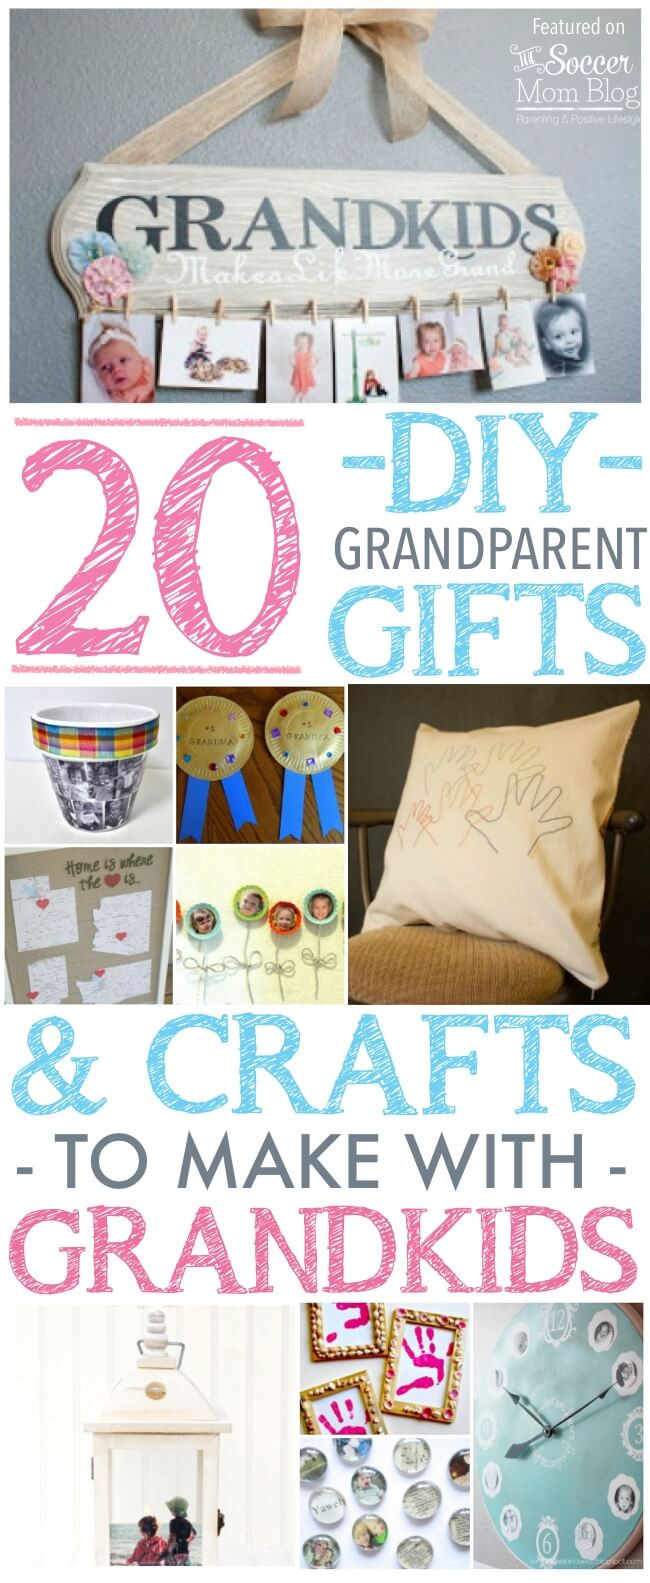 DIY Grandparent Gifts
 20 Grandparent Gifts & Crafts to Make with Grandkids